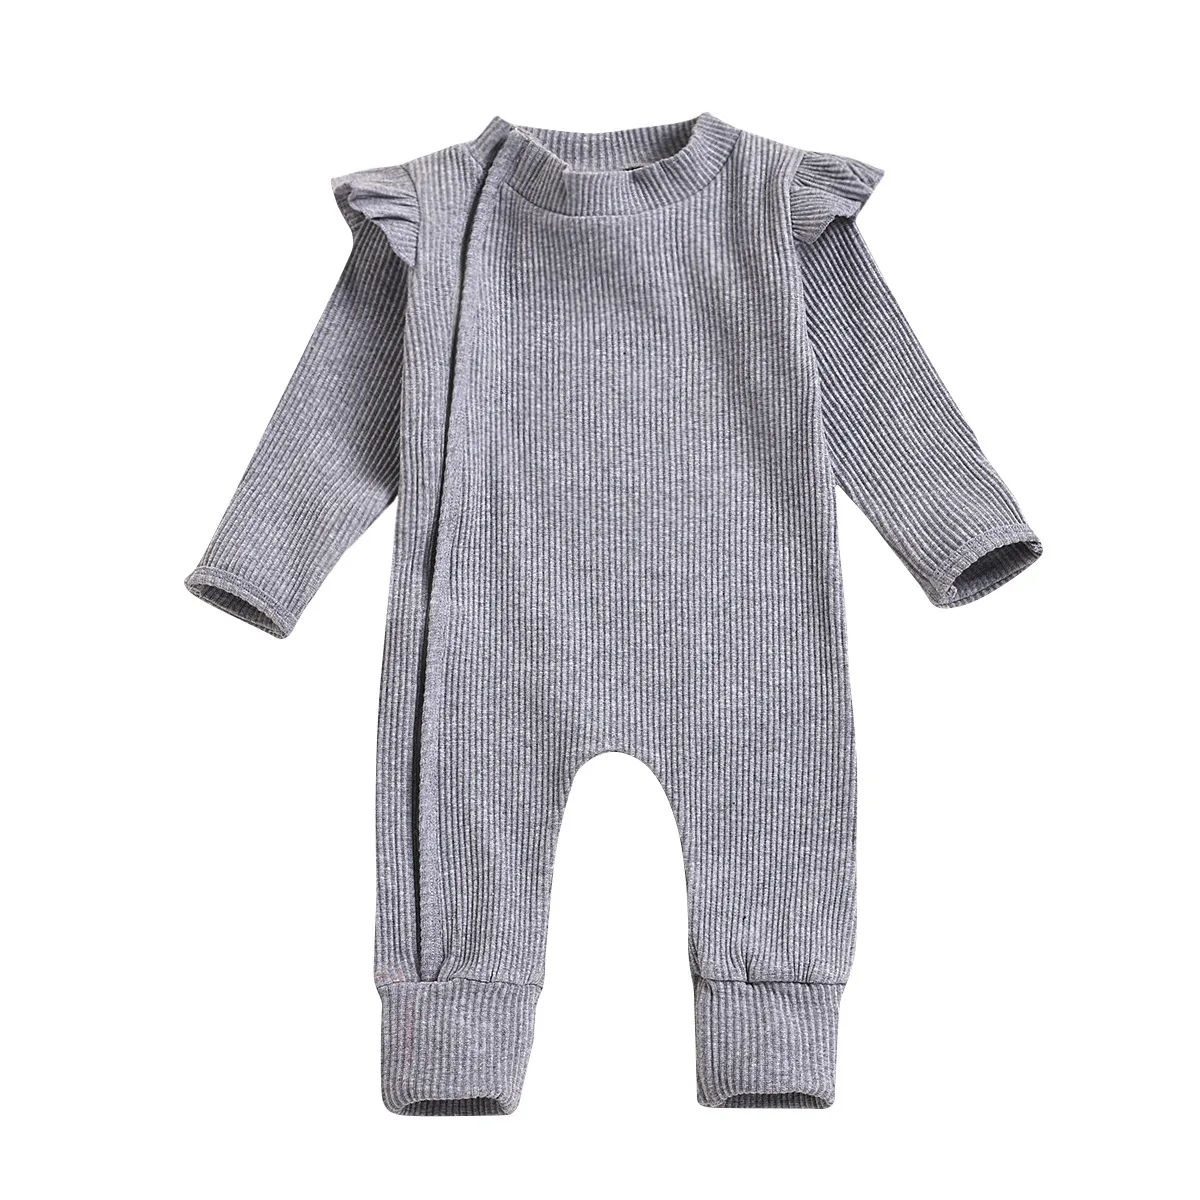 

factory price high quality zipper romper 100% organic knit cotton plain color pink beige new born baby clothes, Green, gray, beige, pink